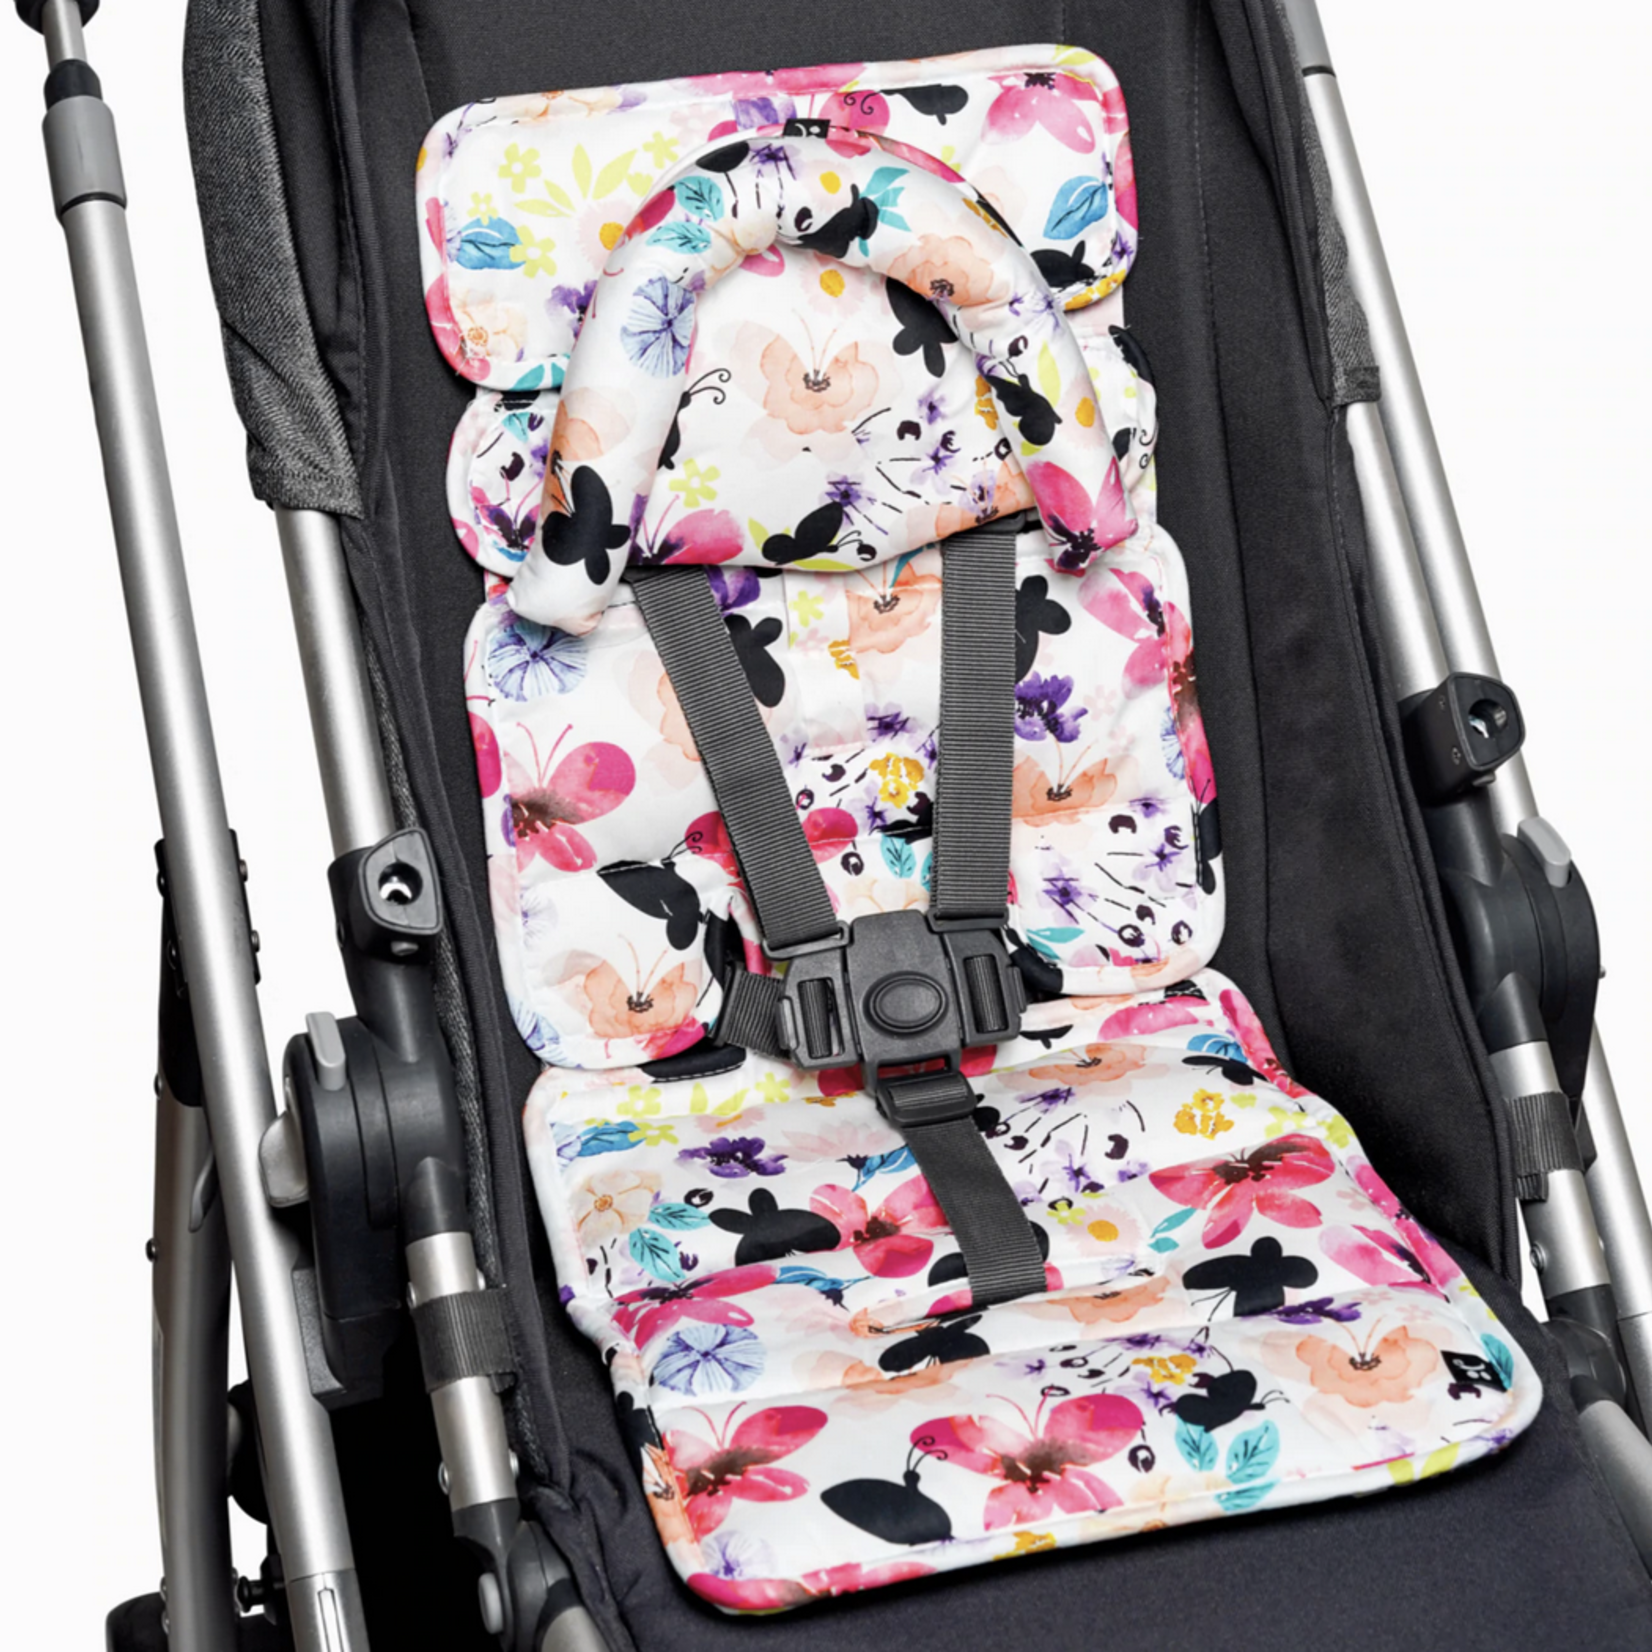 Outlookbaby Outlookbaby Pram Liner with built in head support - Floral Butterfly